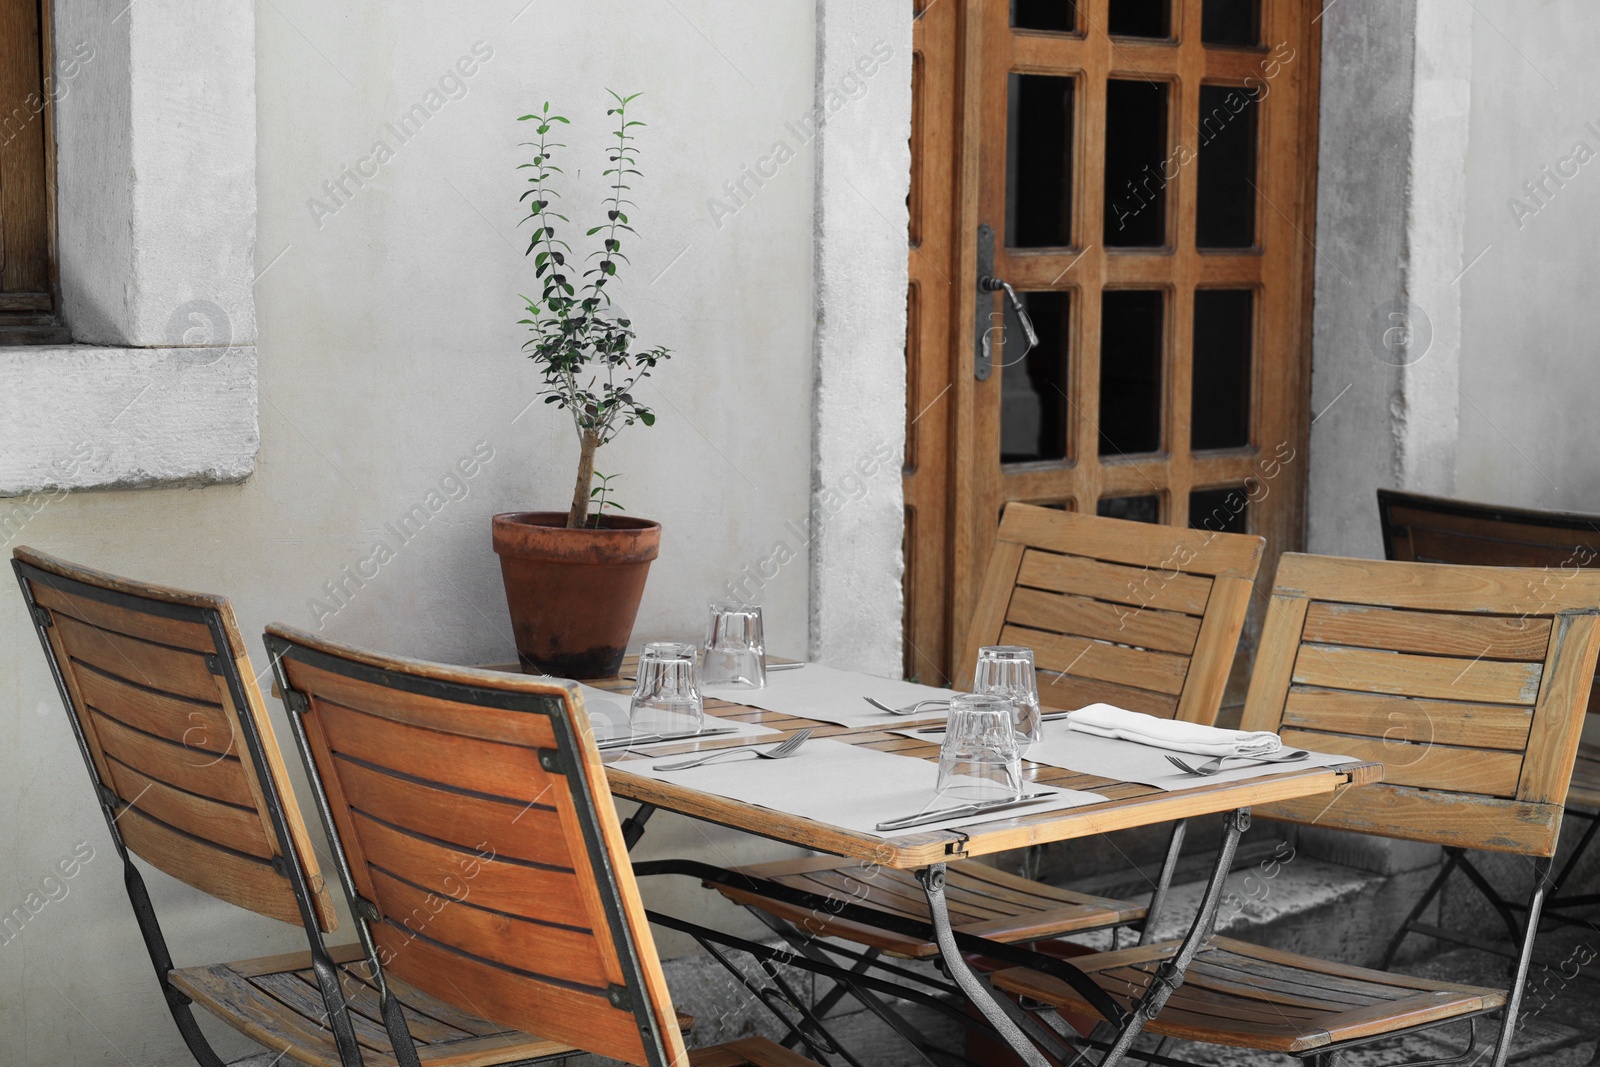 Photo of Outdoor cafe with wooden chairs and table